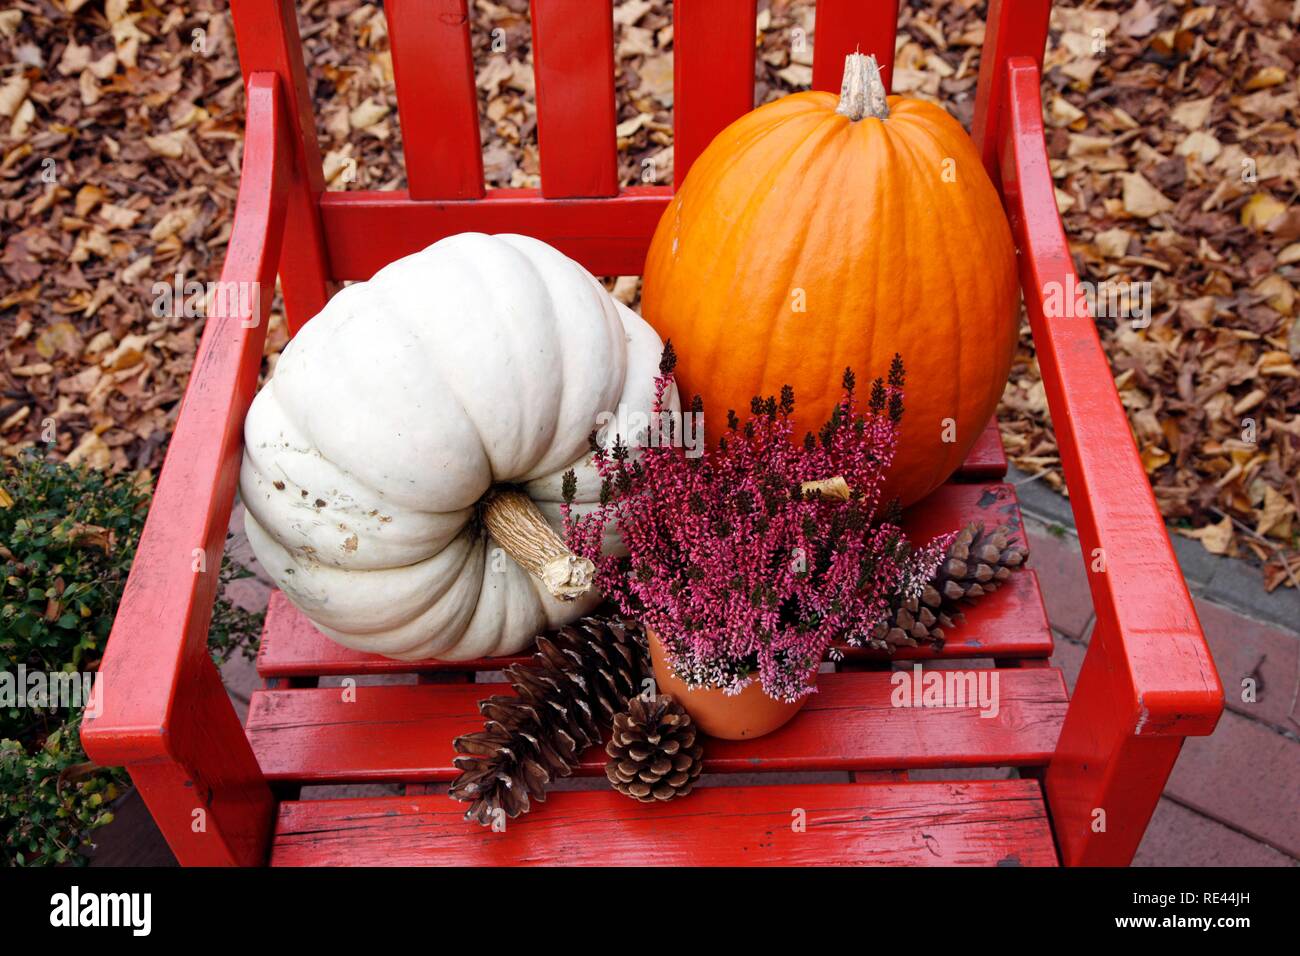 Autumn decoration with pumpkins, pine cones and plants on a red chair in a garden Stock Photo